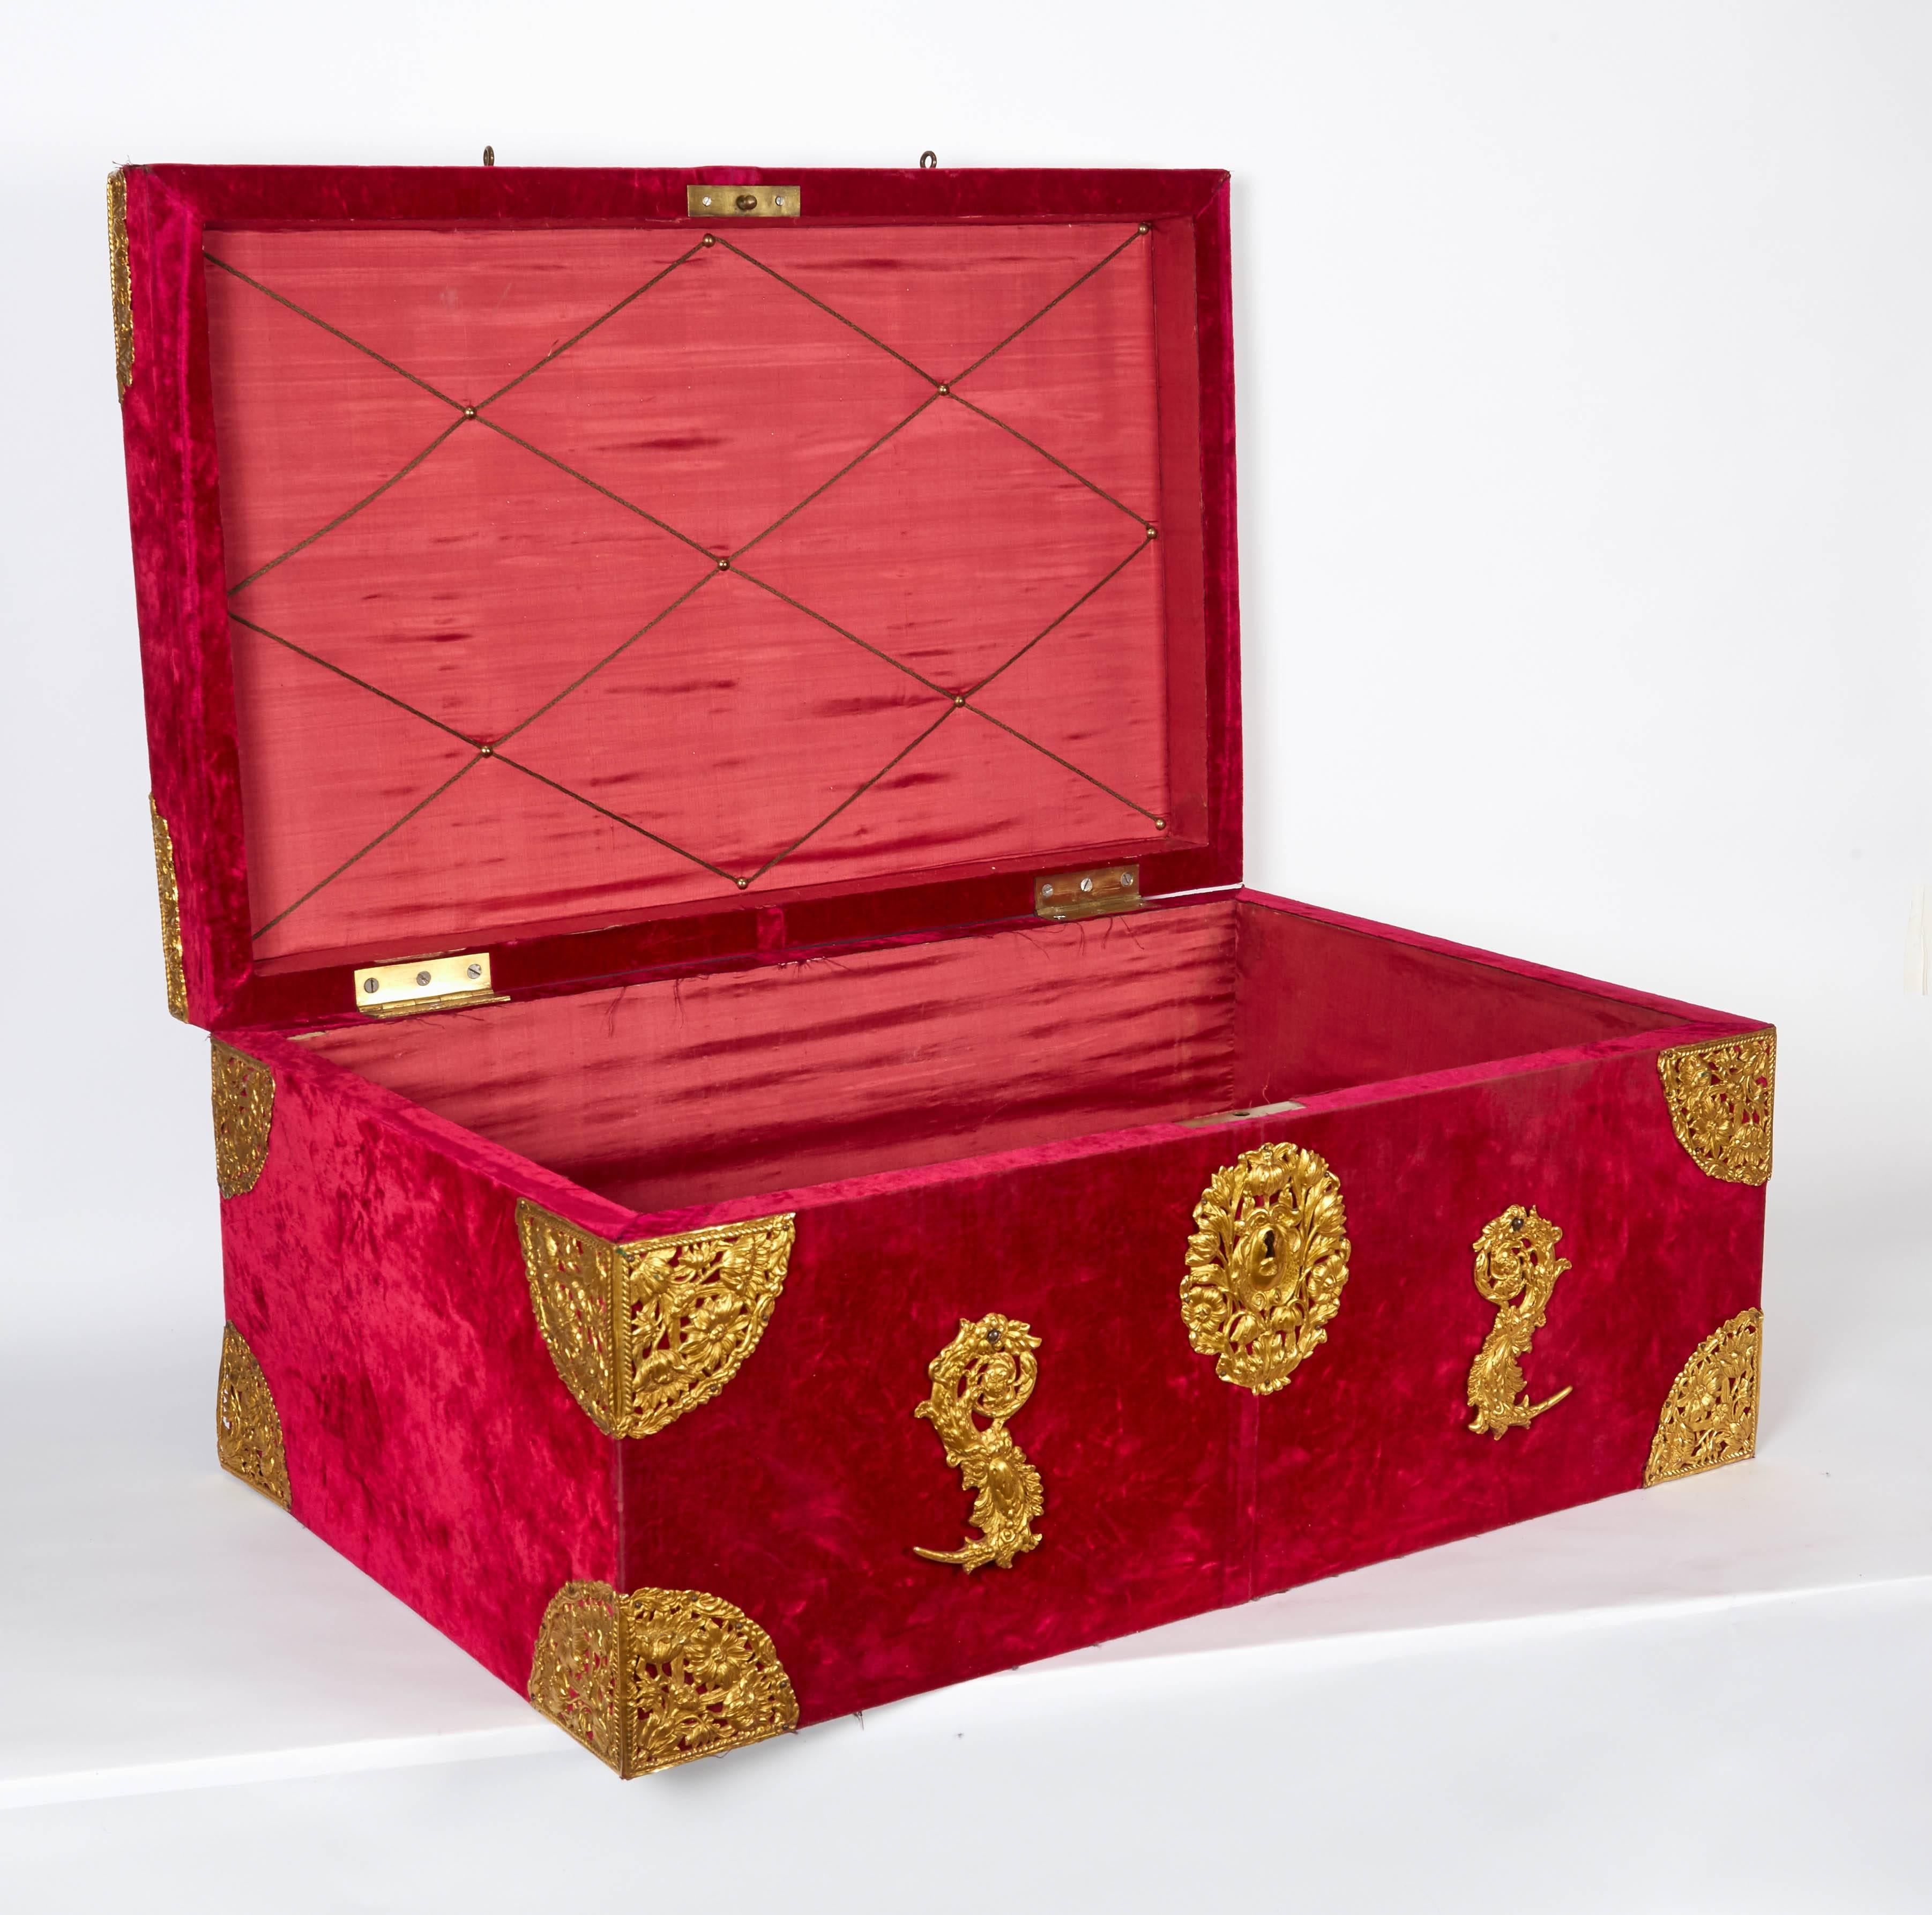 American Large Gilt-Bronze Mounted Red Velvet Box / Trunk by E.F. Caldwell & Co.